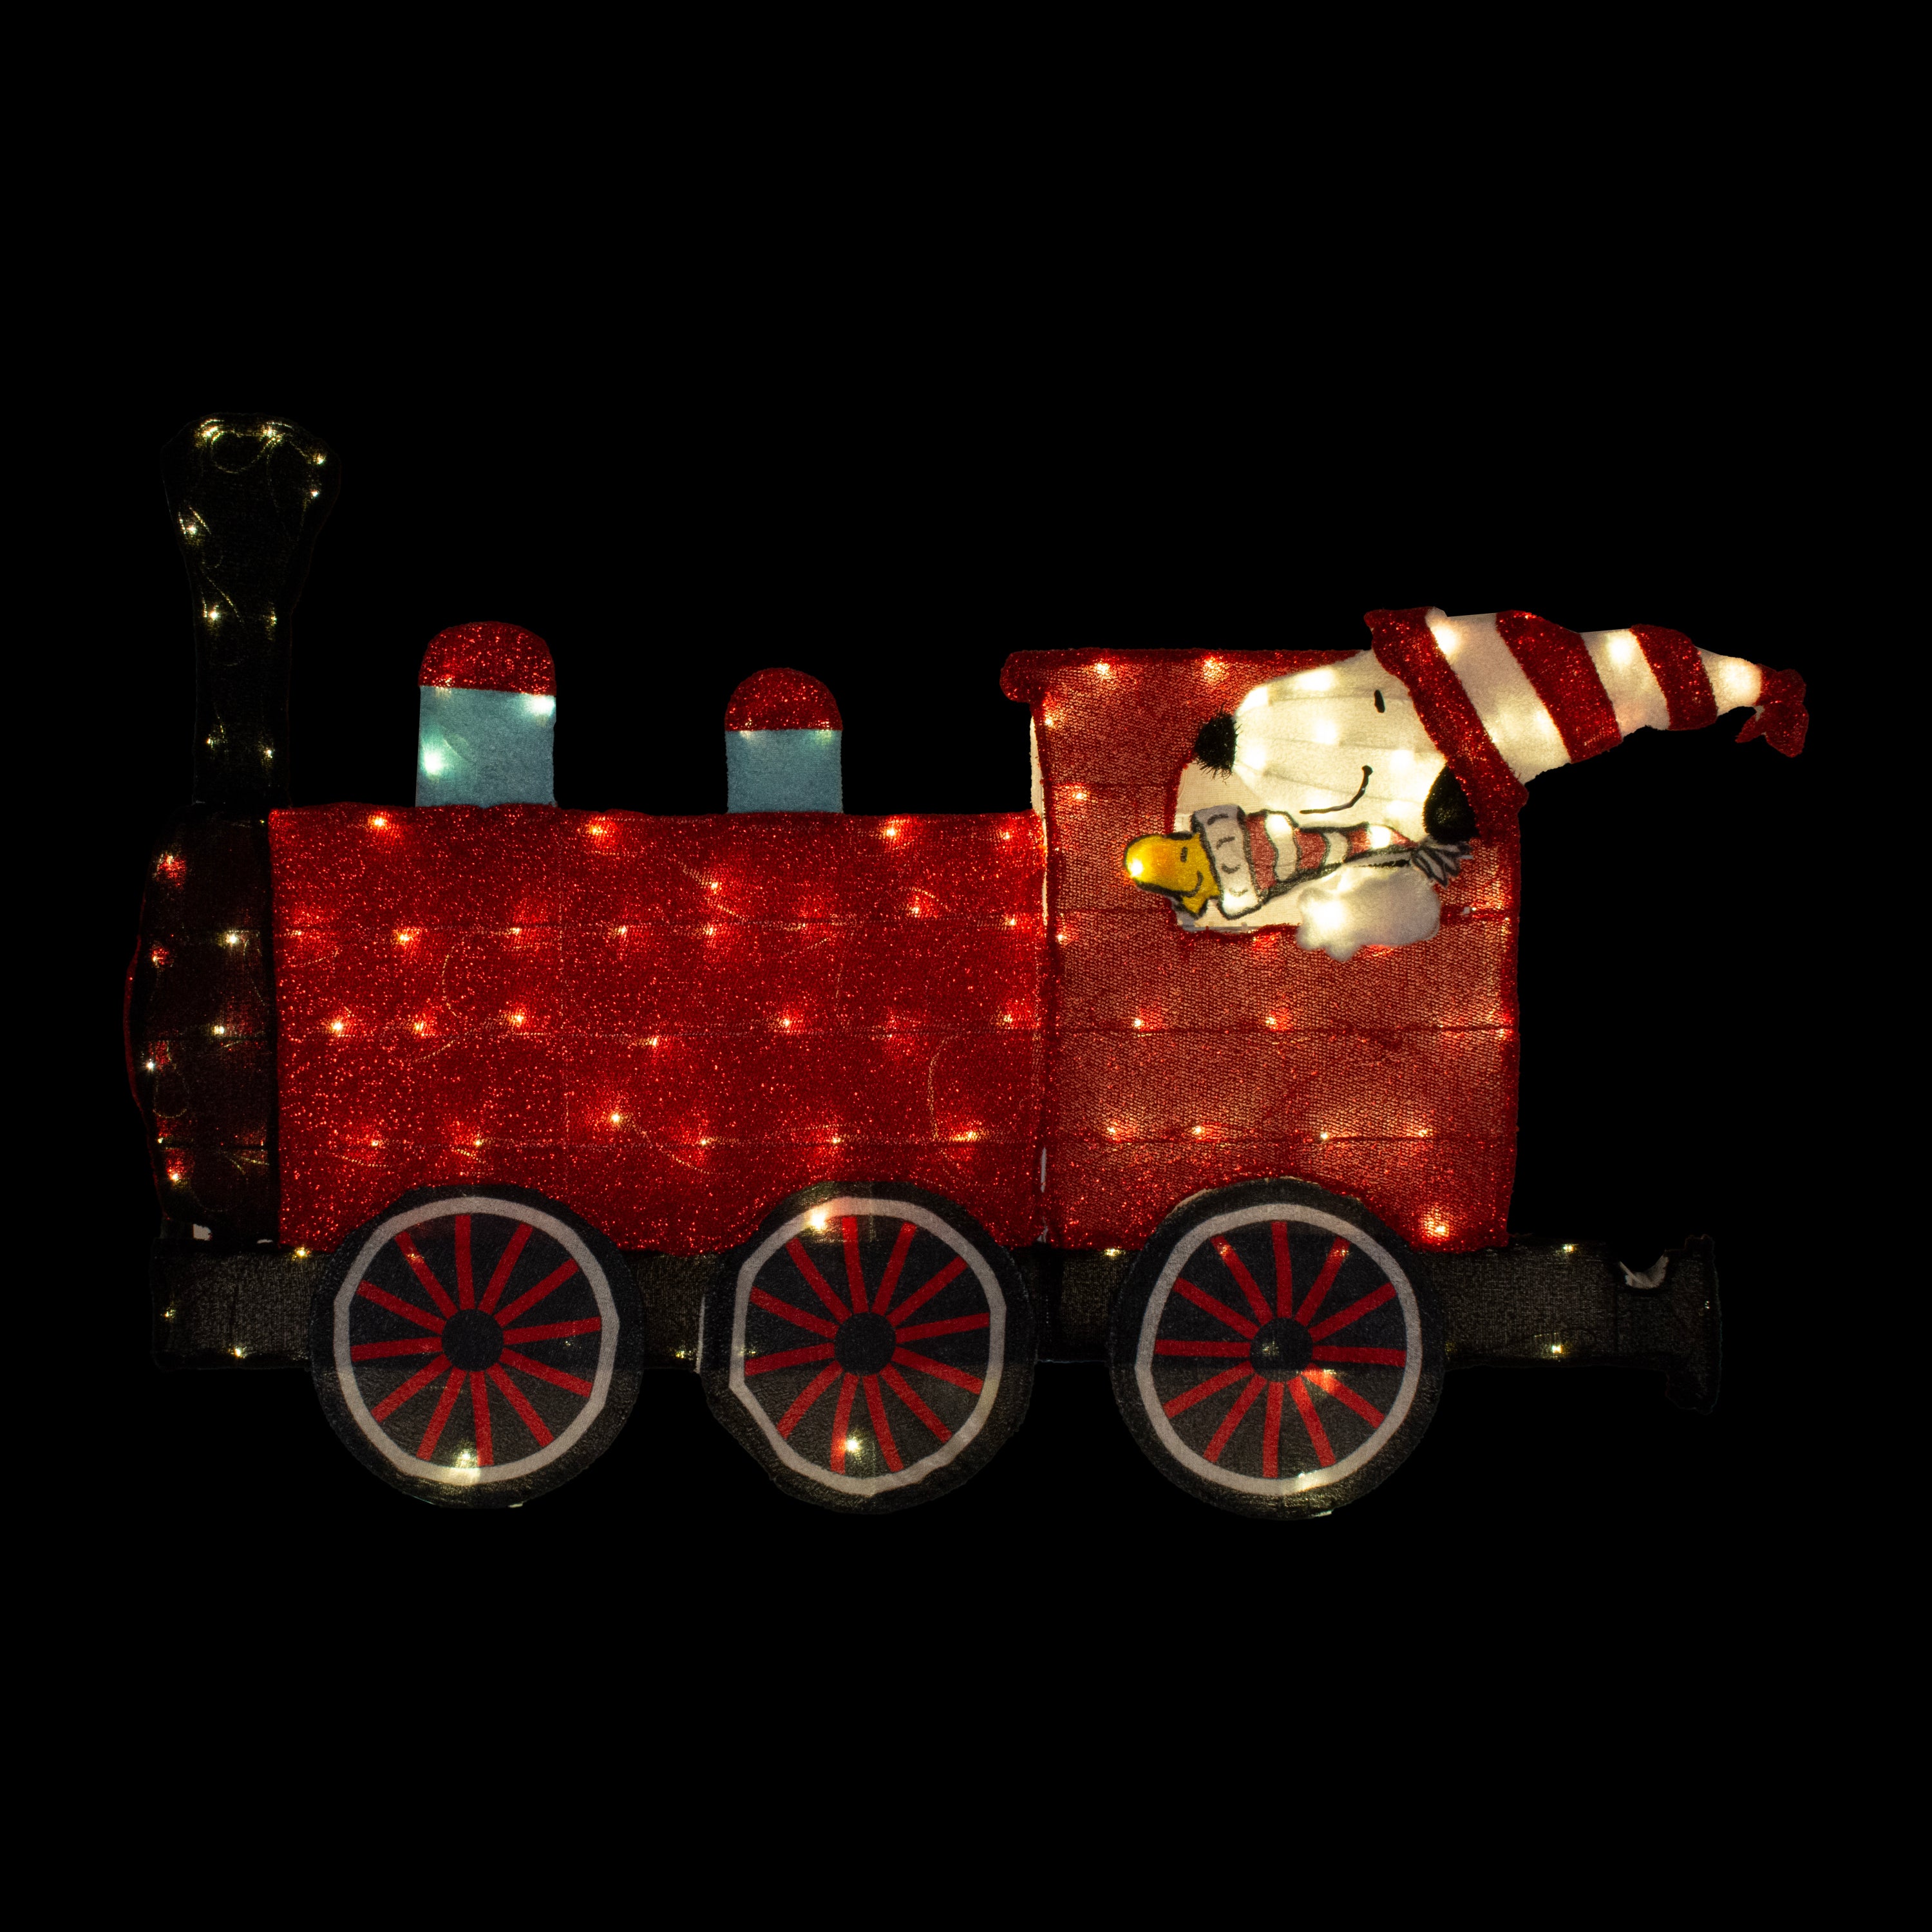 ProductWorks 79IN WIDE PEANUTS PRE LIT LED 2D YARD ART TWO PIECE TRAIN SET, Red